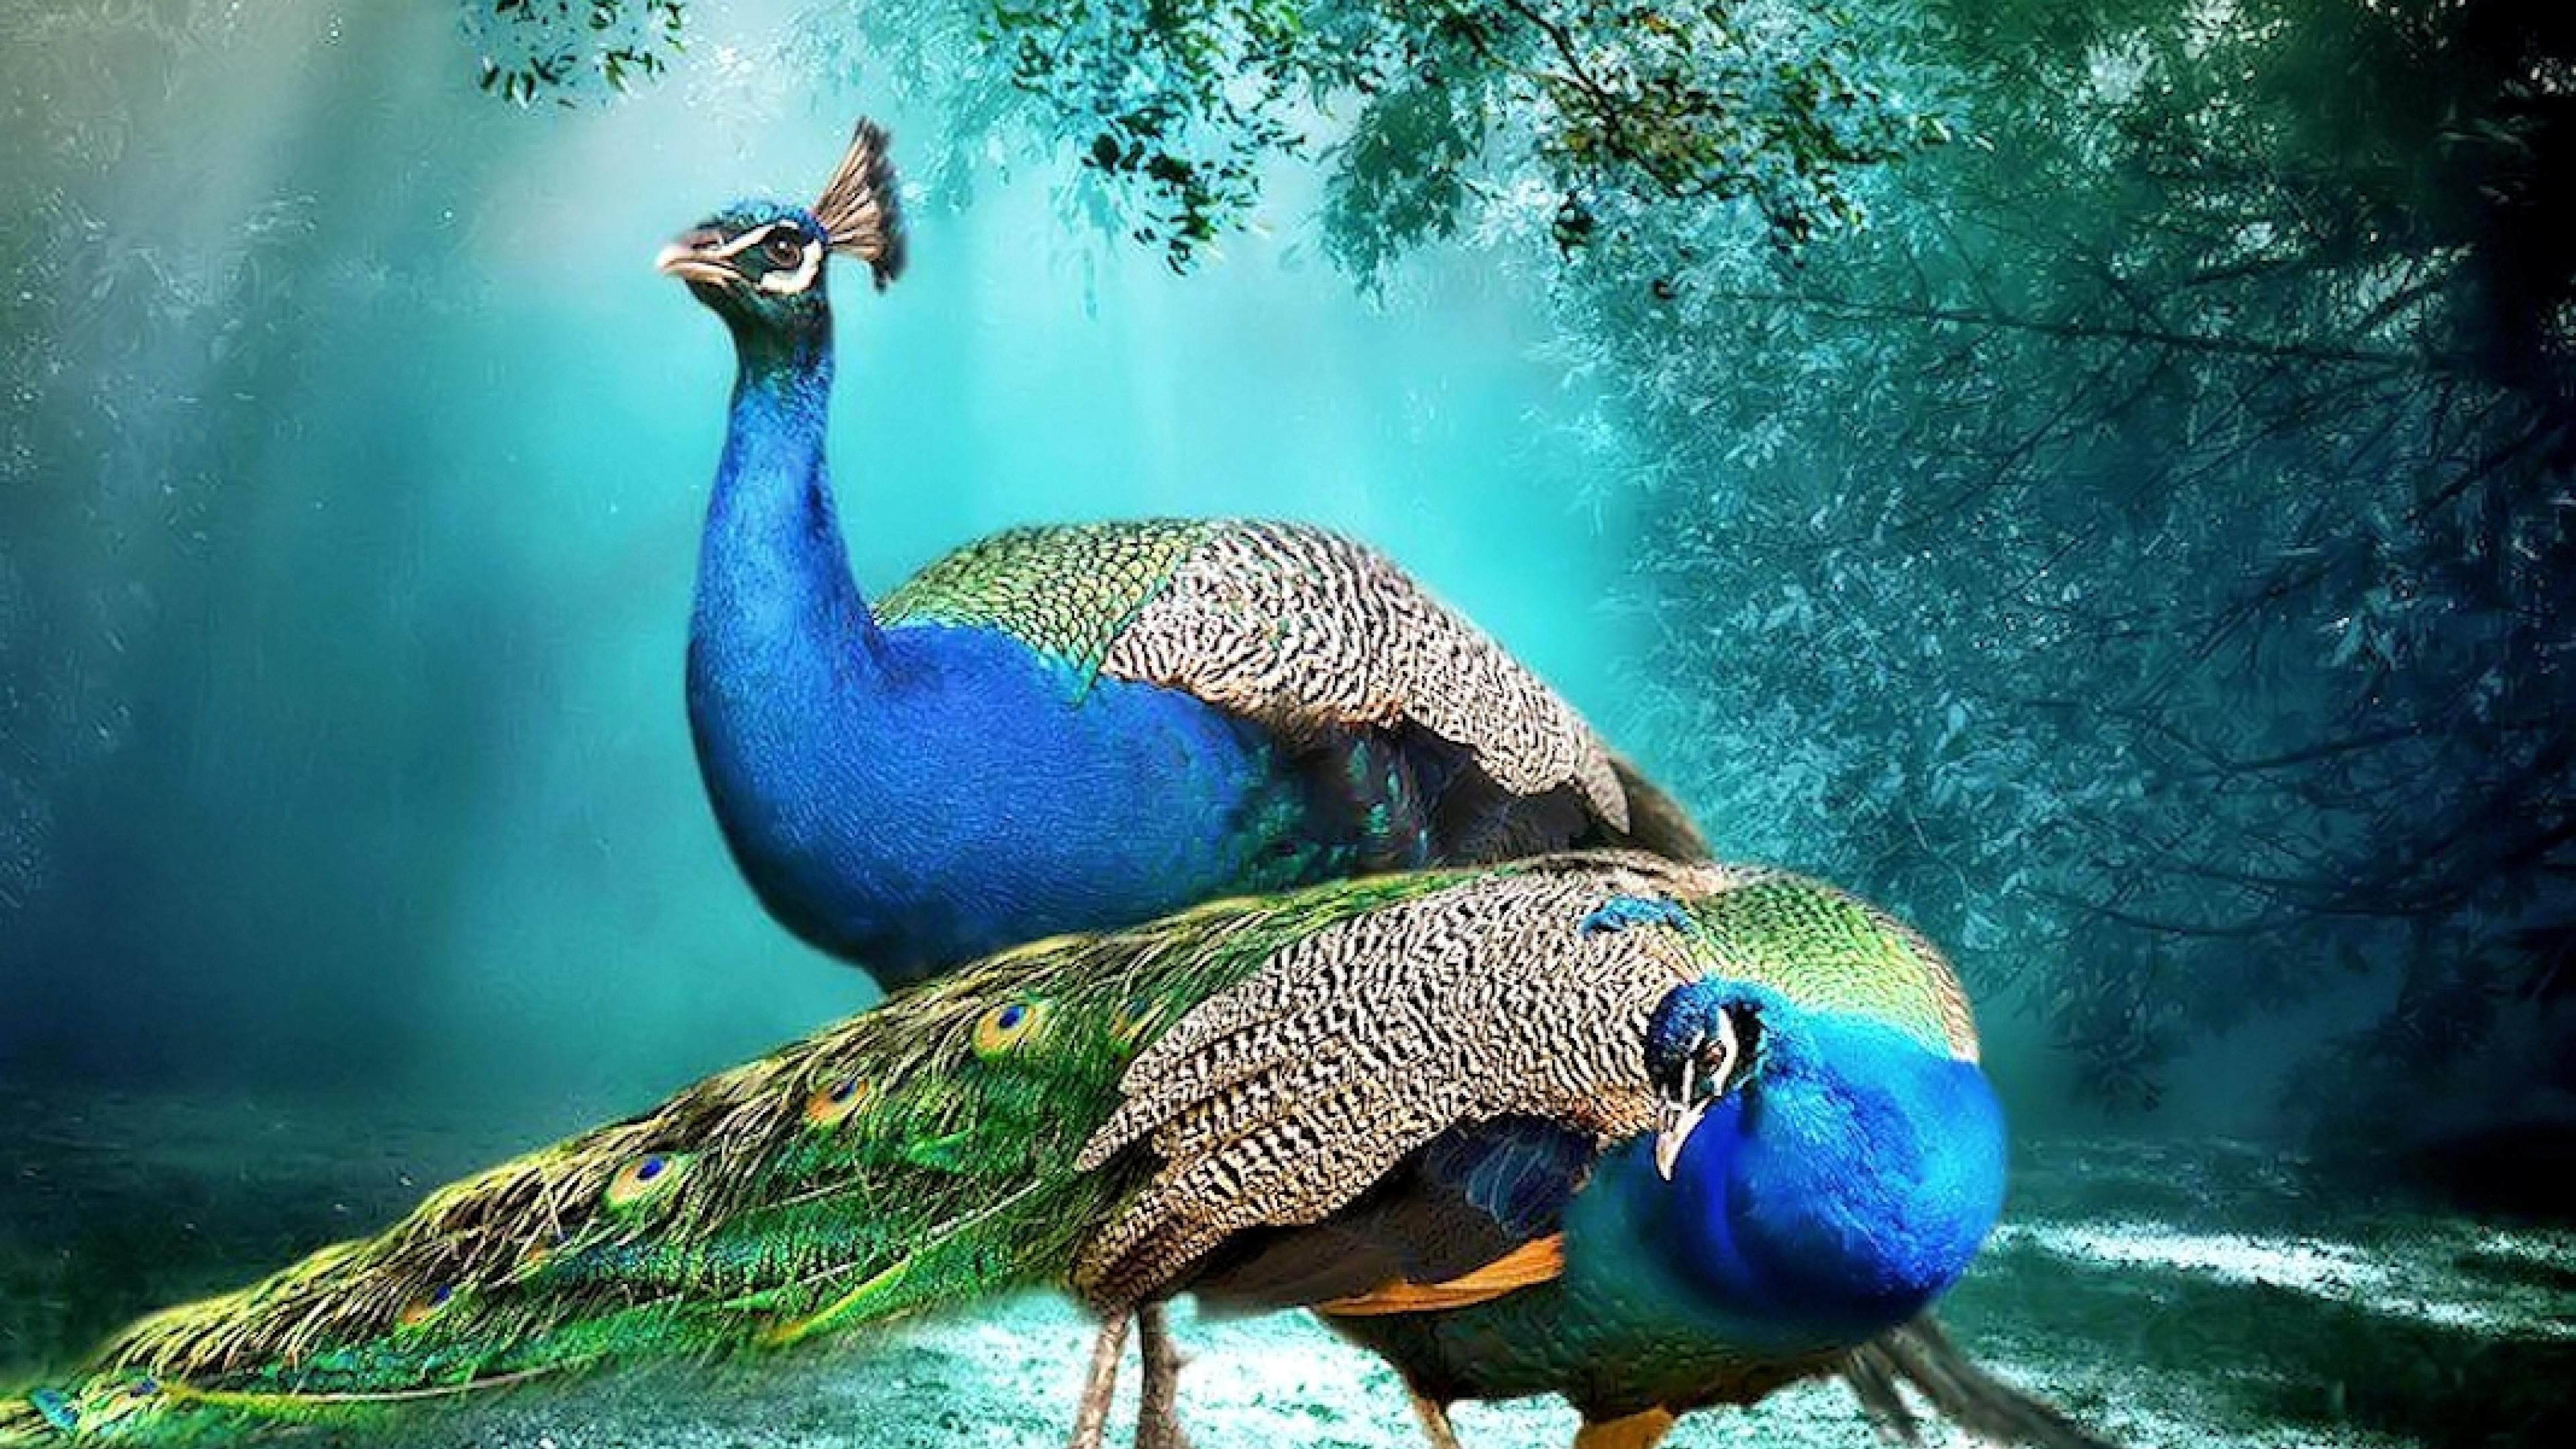 Two Peacocks Image - ID: 248517 - Image Abyss